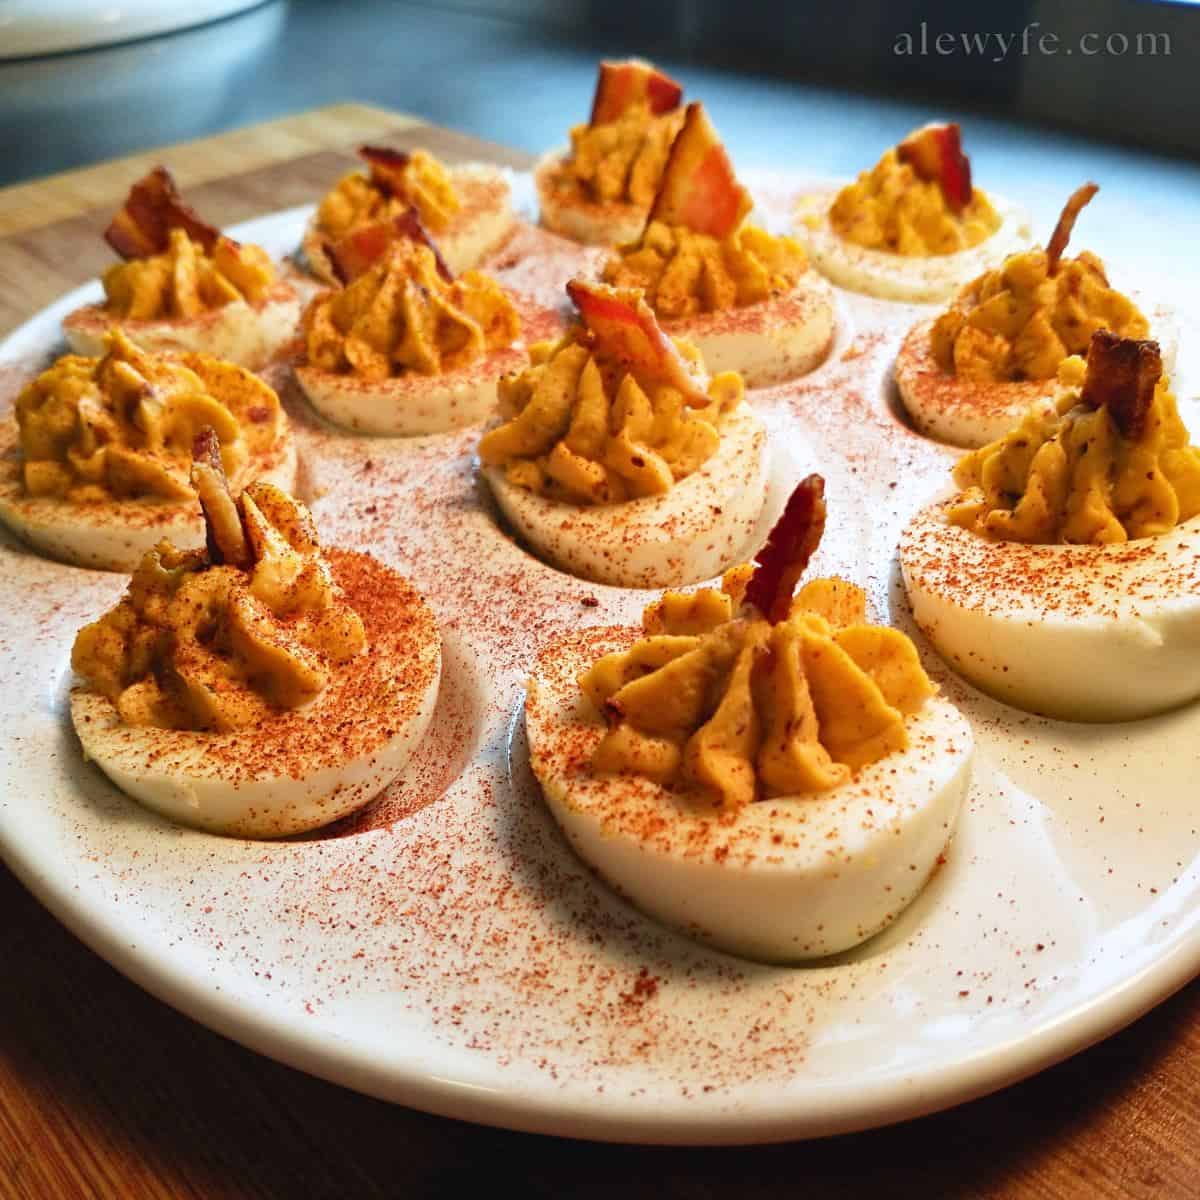 a platter of deviled eggs, with a dusting of paprika over the top and a bacon garnish in each egg.